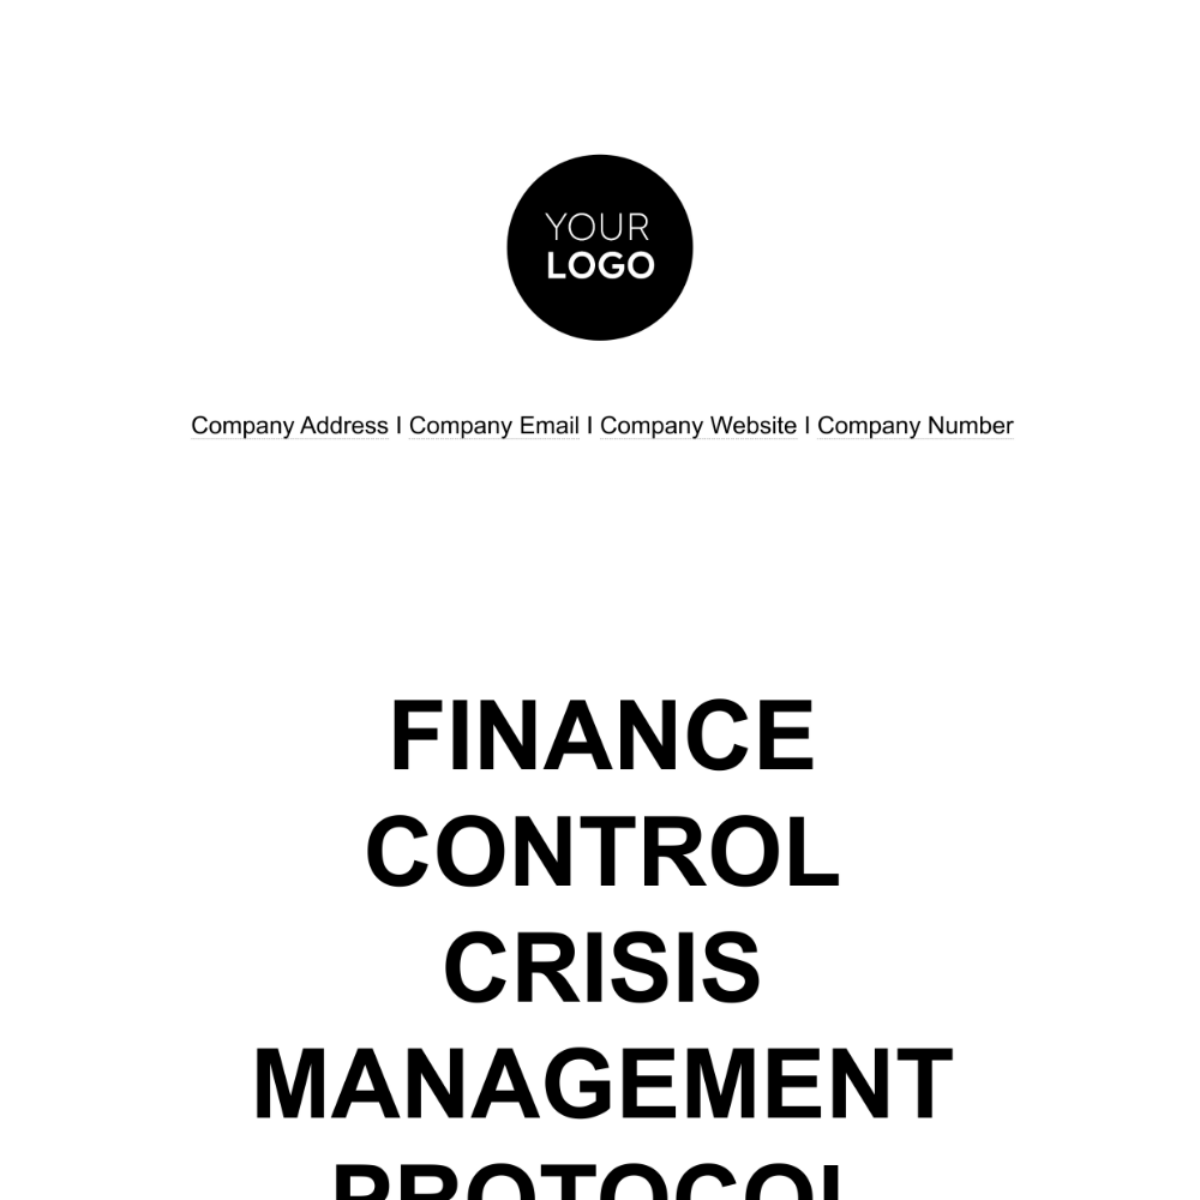 Free Finance Control Crisis Management Protocol Template